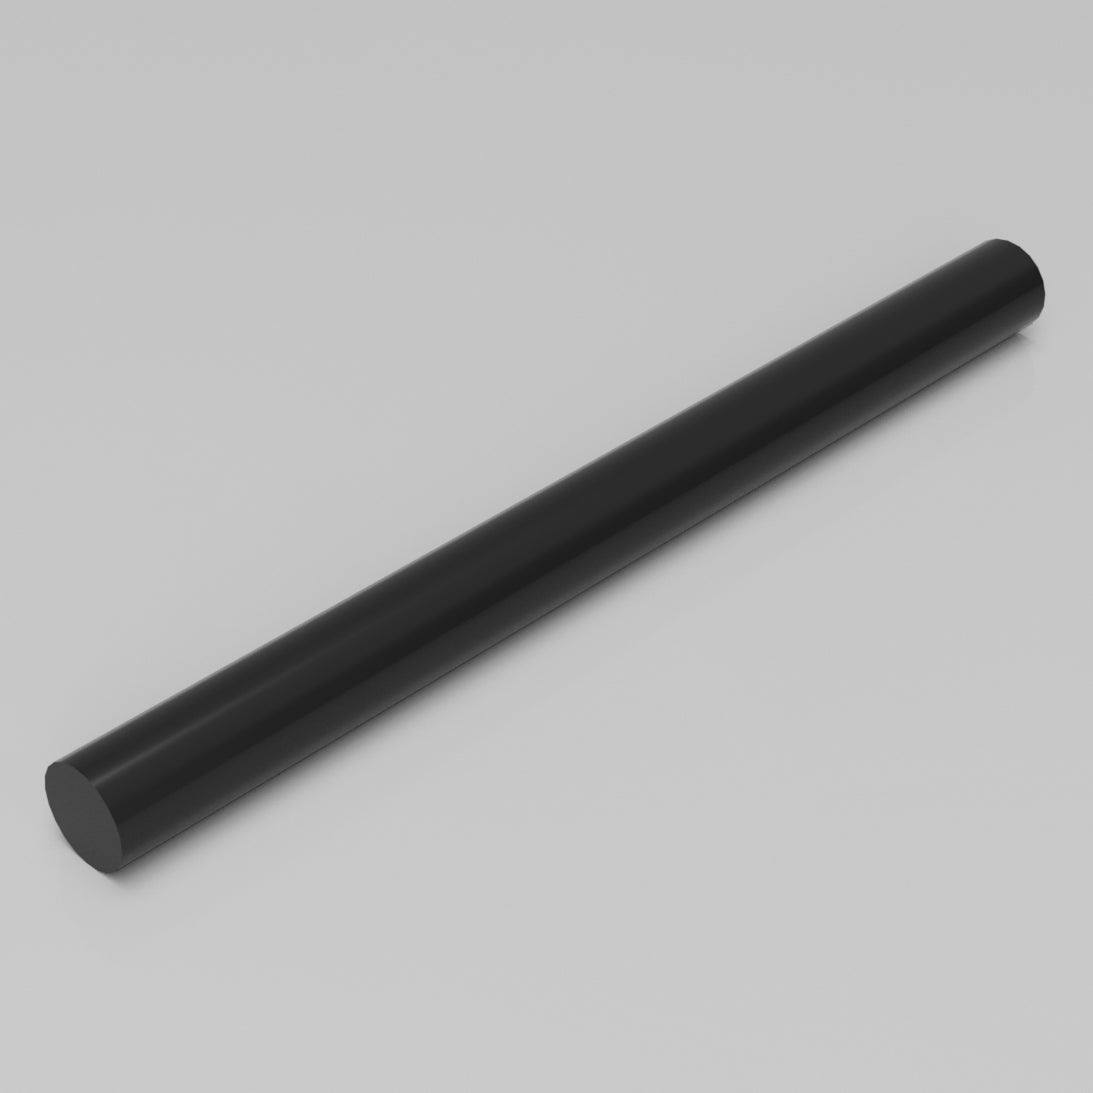 Machinable Wax Cylinder Bar Front View 1 Inch by 12 Inch